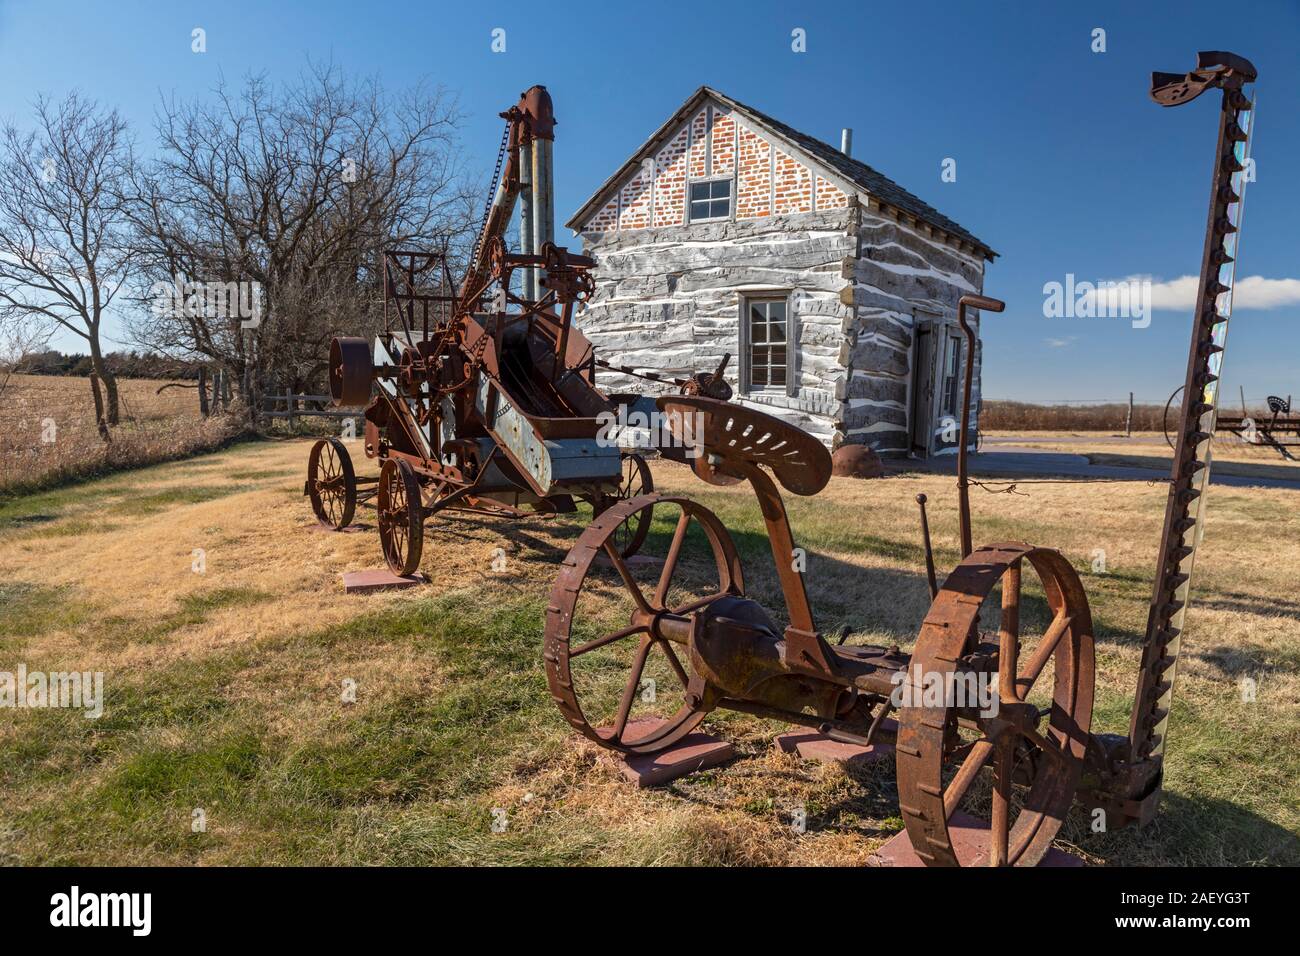 Beatrice, Nebraska - The Palmer-Epard Cabin at Homestead National Monument, with antique farm machinery. Stock Photo